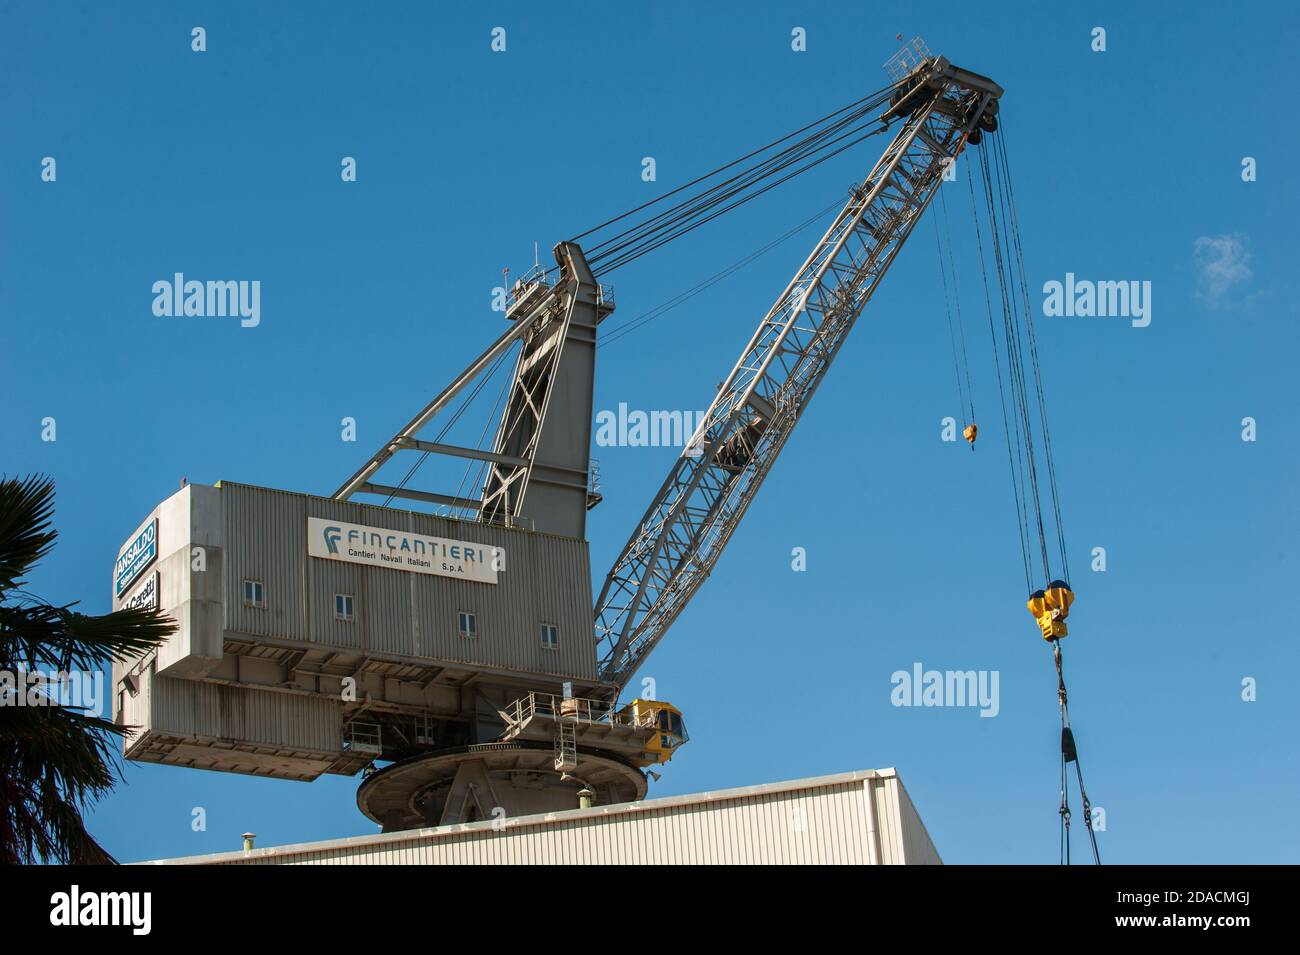 View on Fincantieri shipyard with cranes, coils, from Castellamare di Stabia, Naples Stock Photo